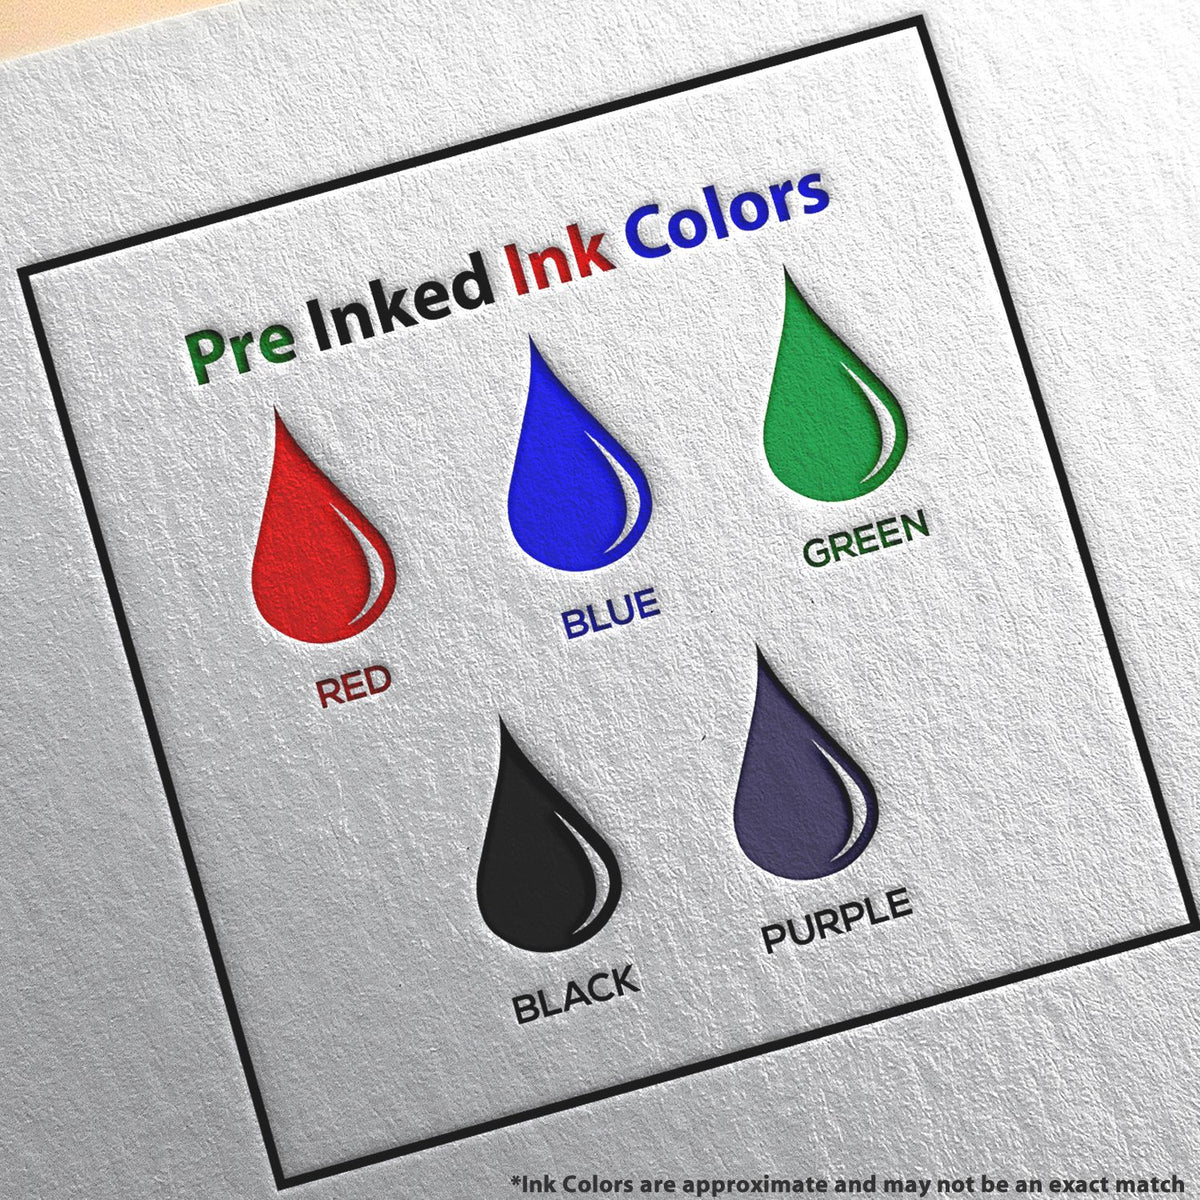 A picture showing the different ink colors or hues available for the Slim Pre-Inked District of Columbia Professional Engineer Seal Stamp product.